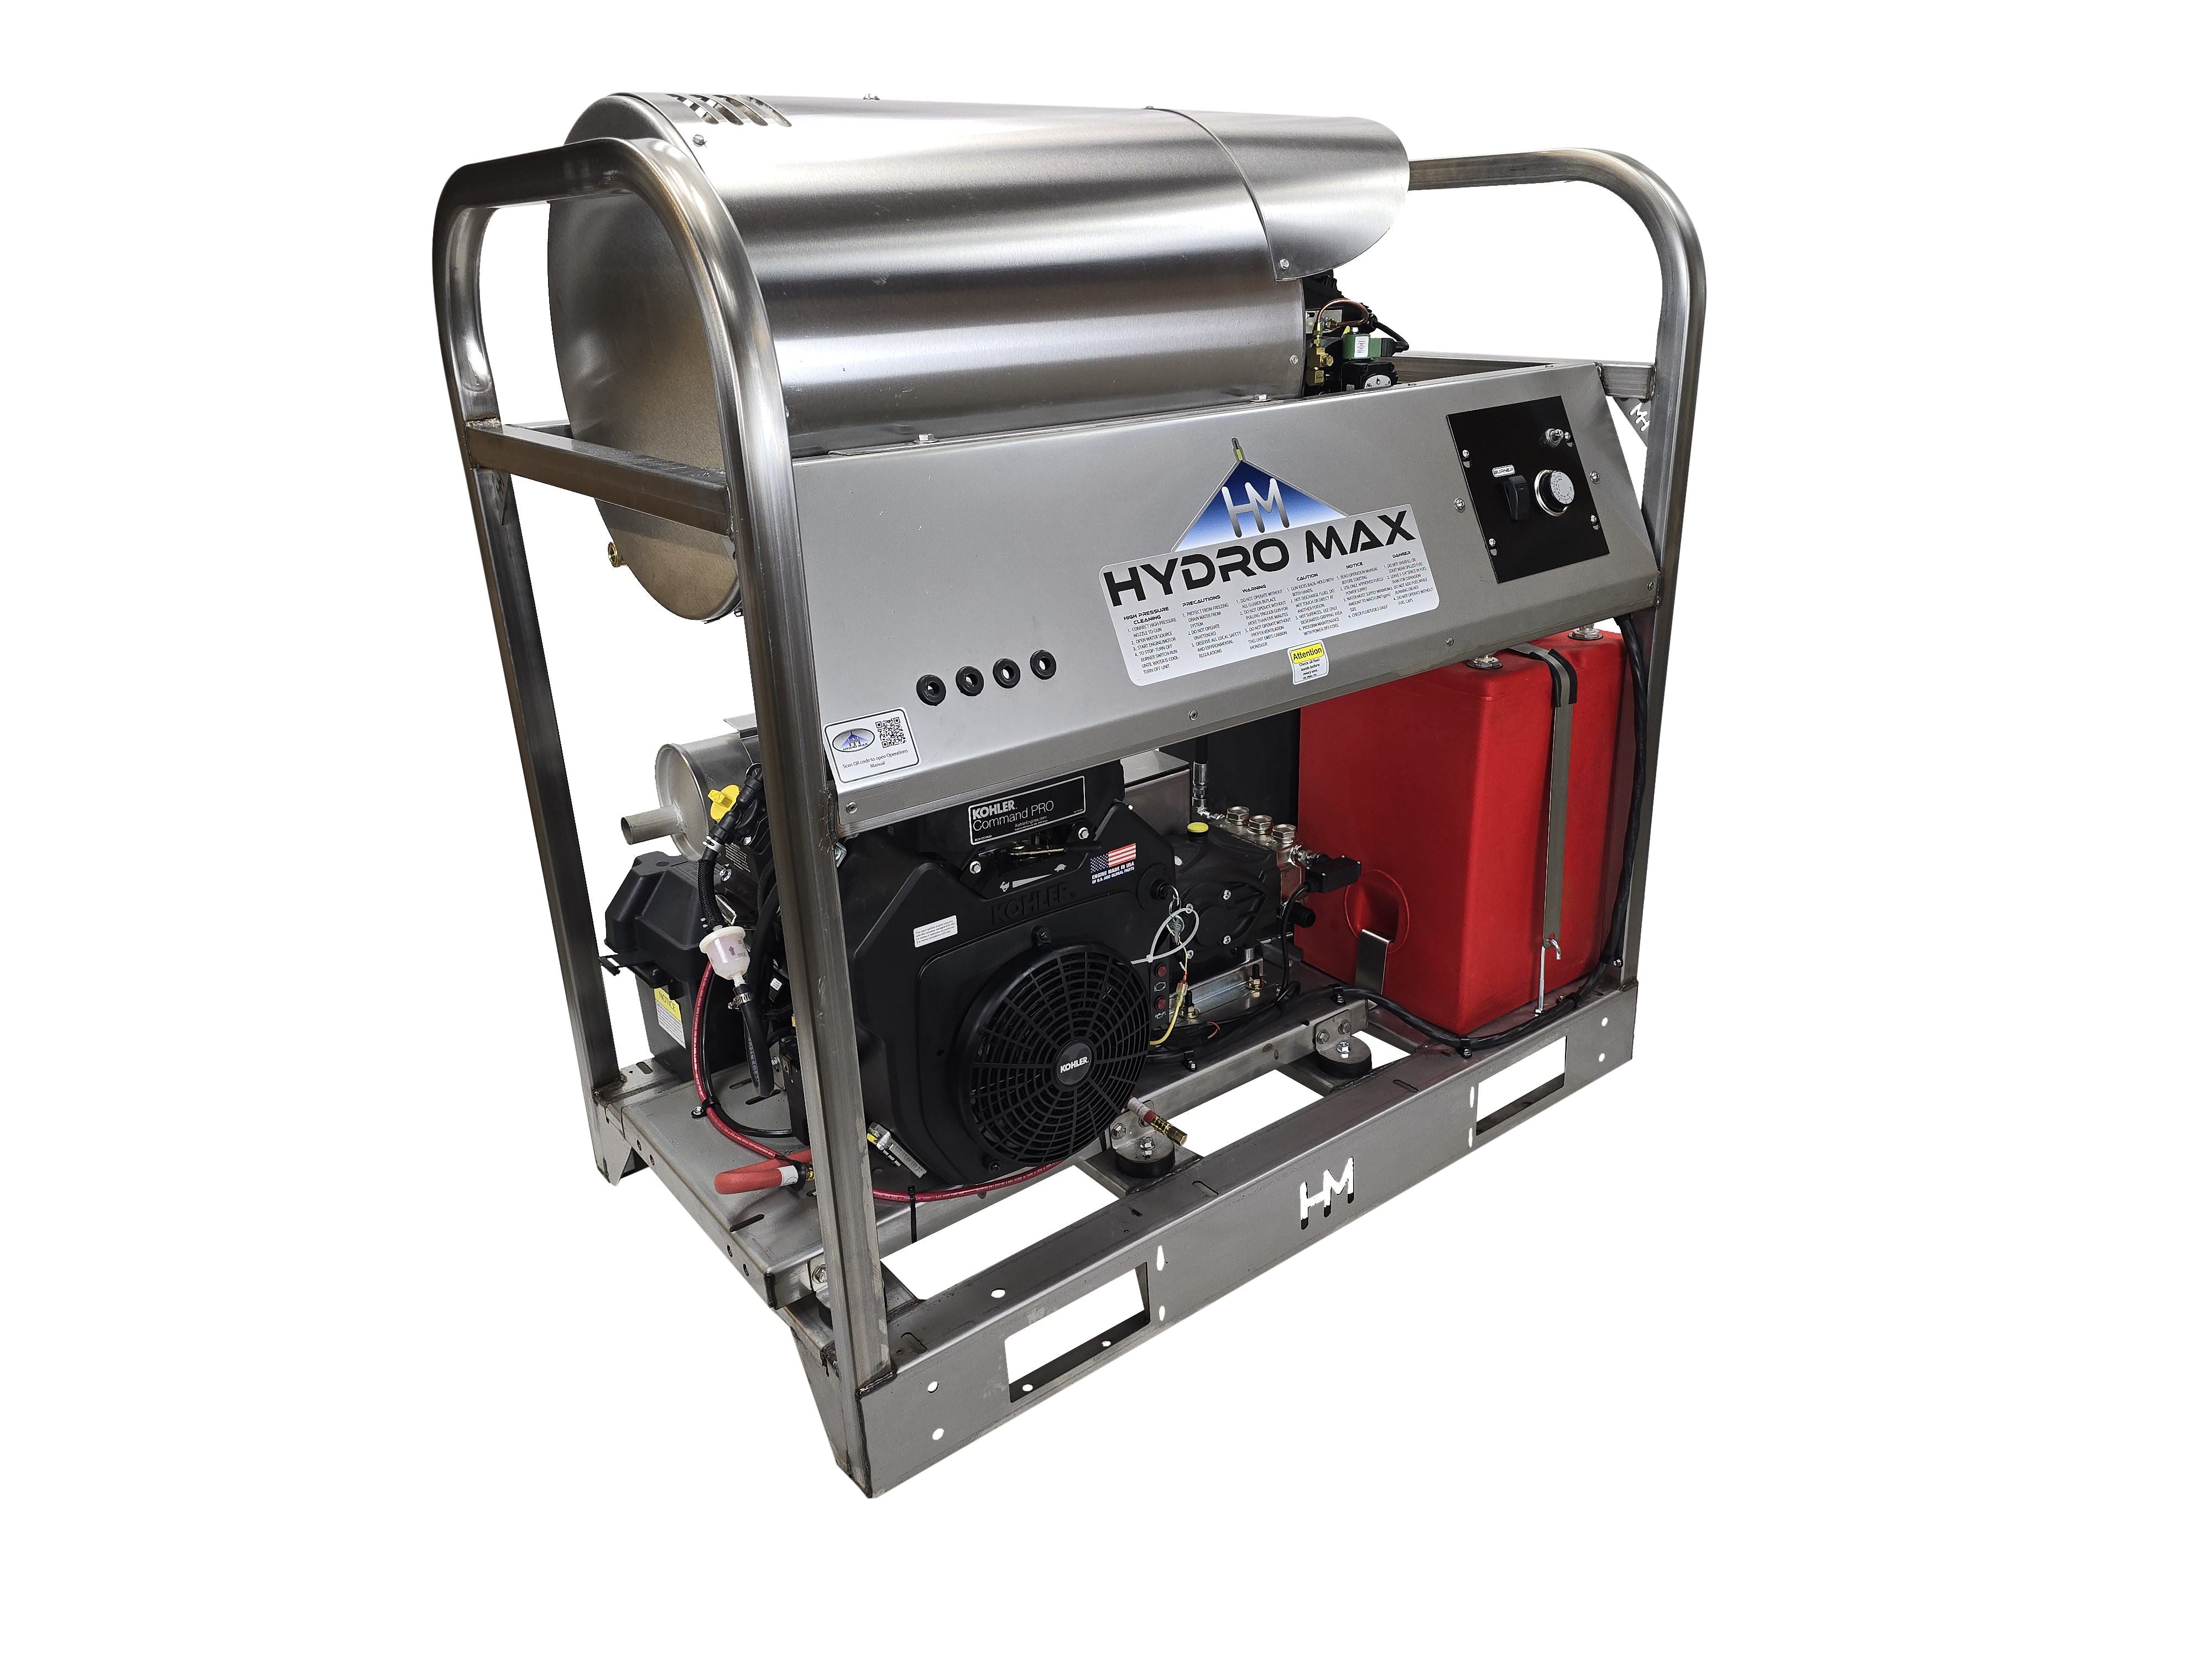 Hydro Max DC10040KGi- 10gpm @ 4000psi, Kohler 38HP(Fuel Injected Engine) Hot Water Pressure Washer Hydro Max 